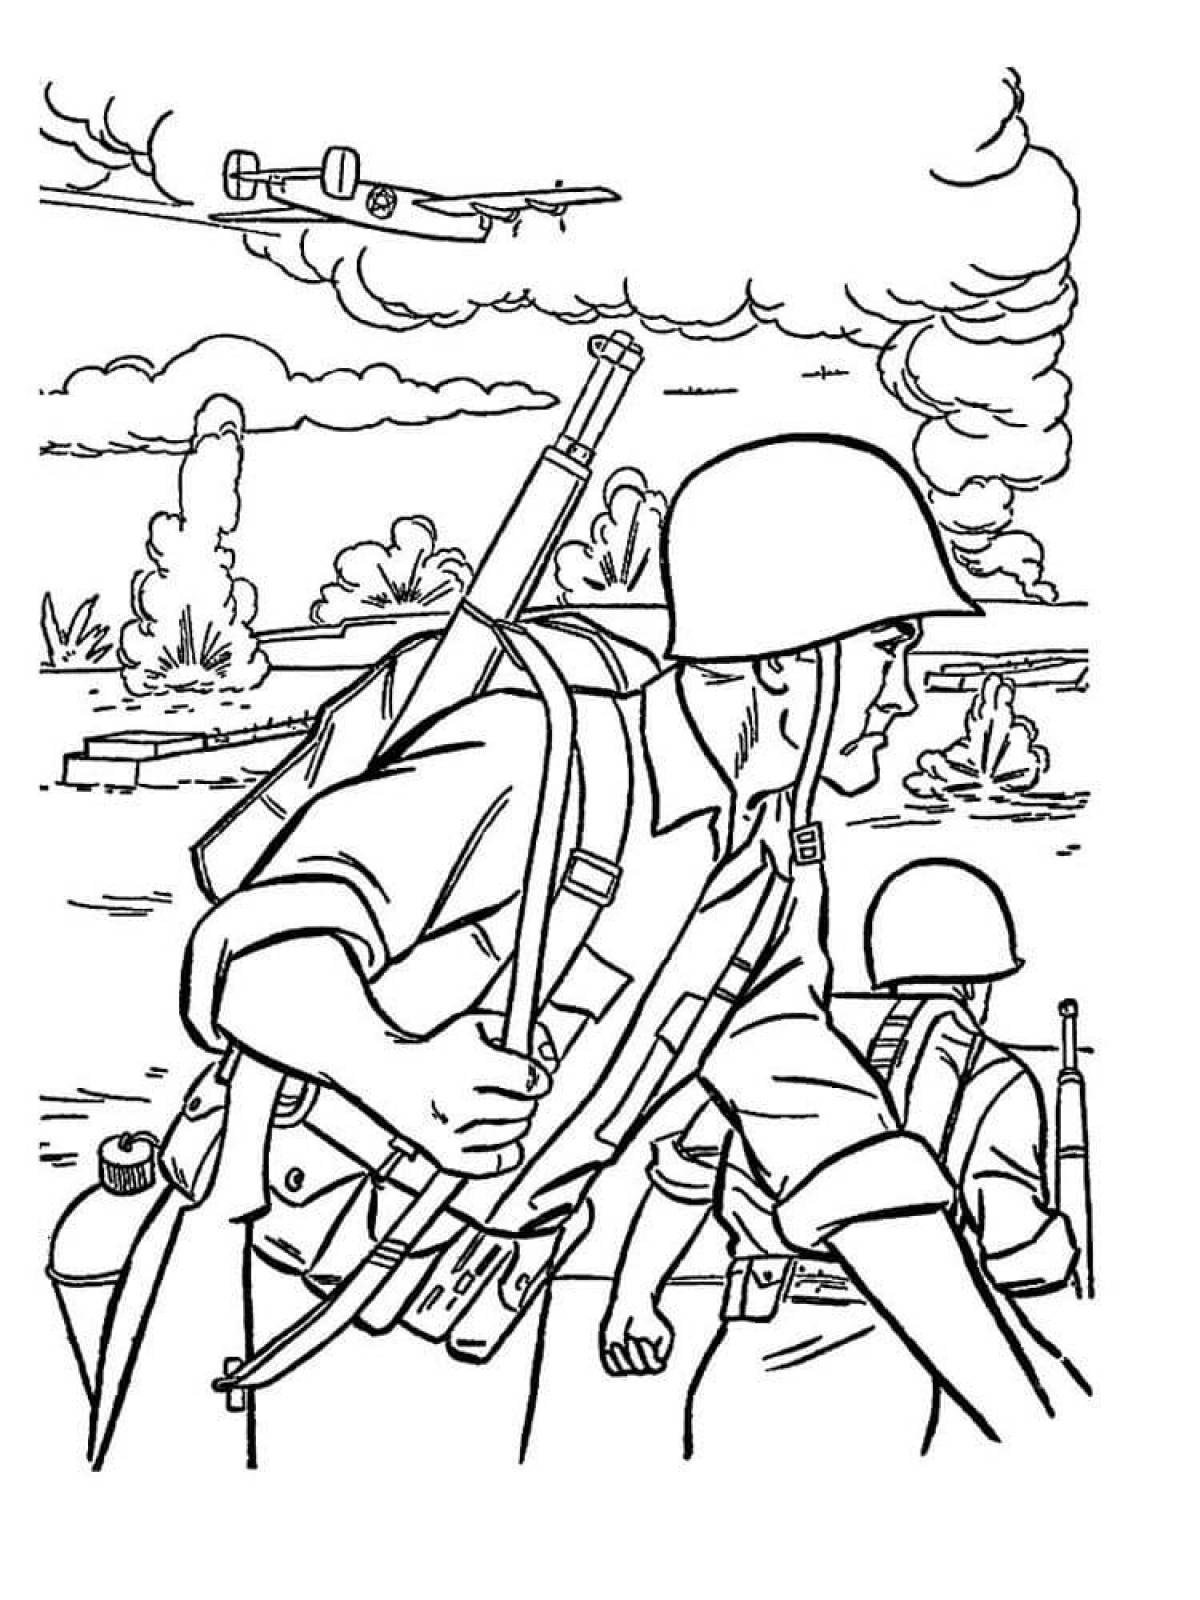 Solid soldier coloring